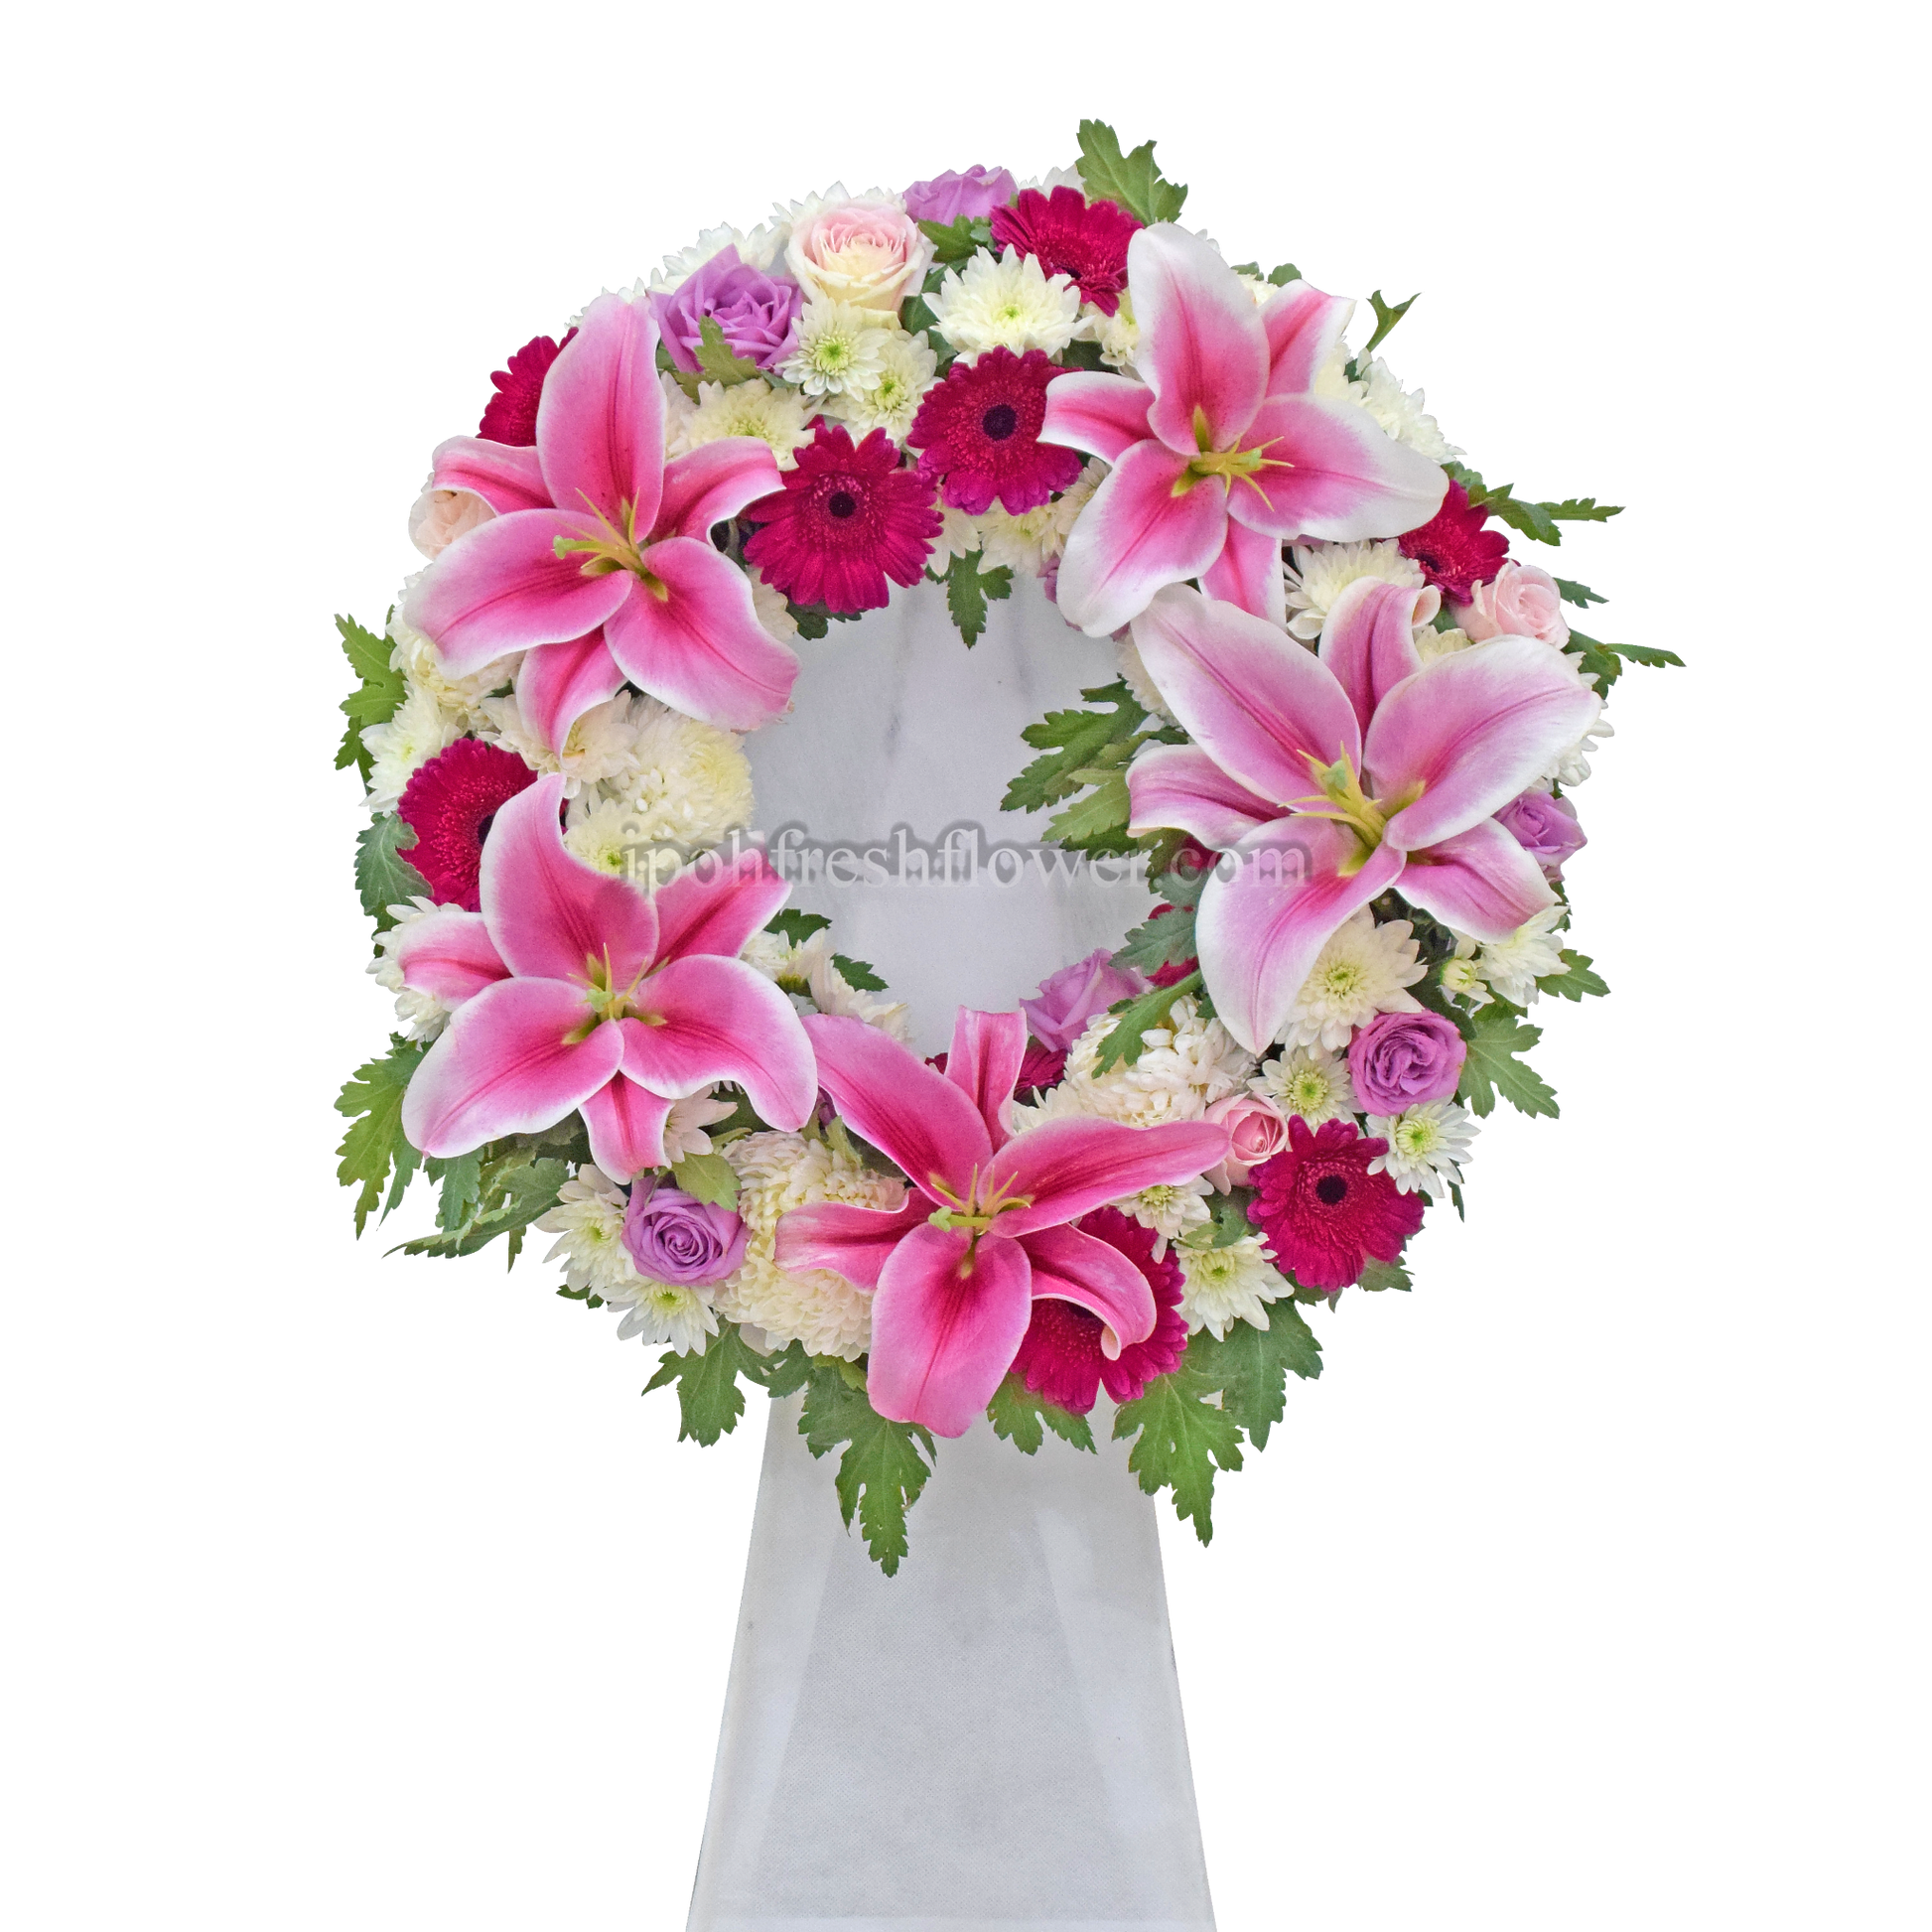 Condolence Wreaths & Funeral Flower Stand A8| Same Day Free Delivery